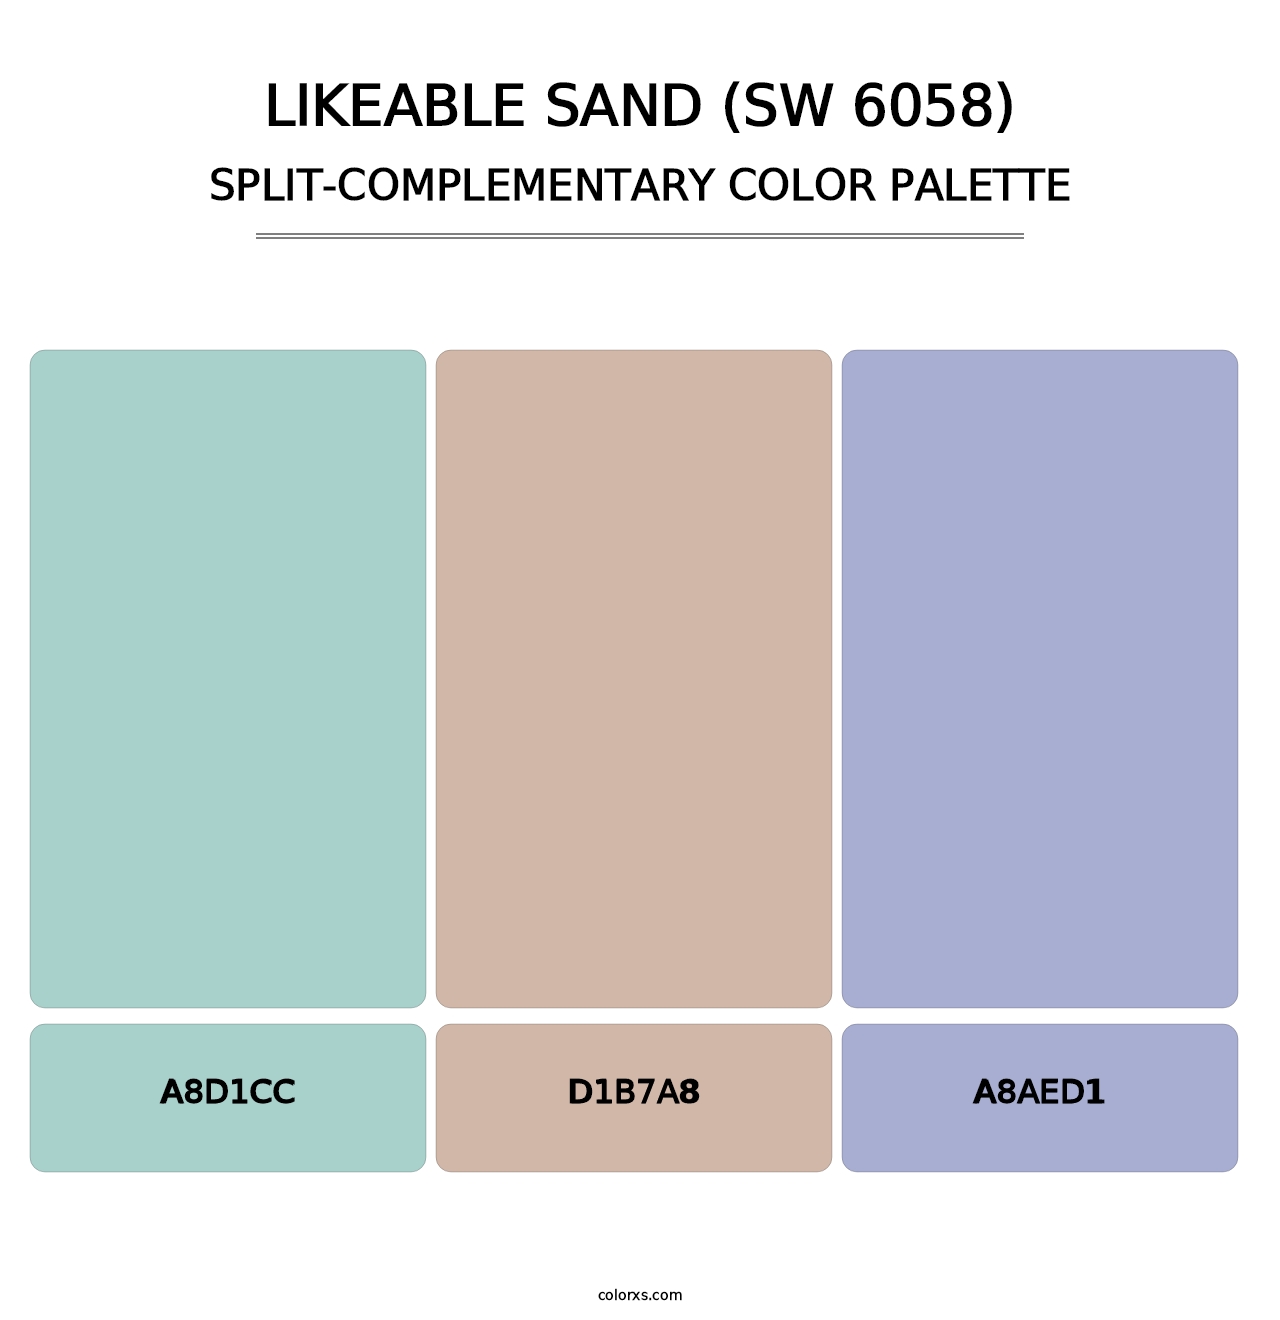 Likeable Sand (SW 6058) - Split-Complementary Color Palette